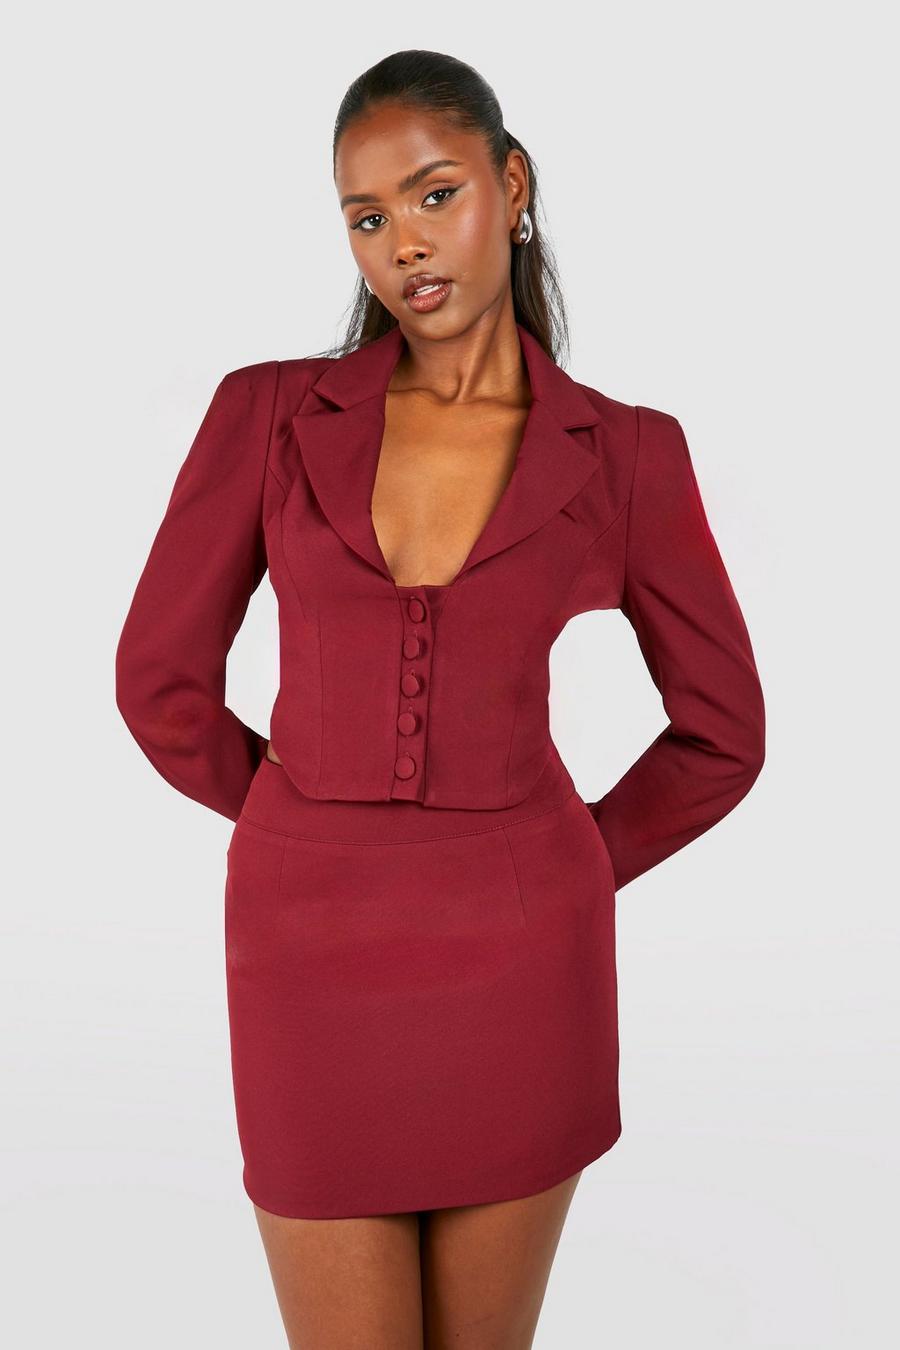 Suit Skirts, Tailored Pencil Skirts